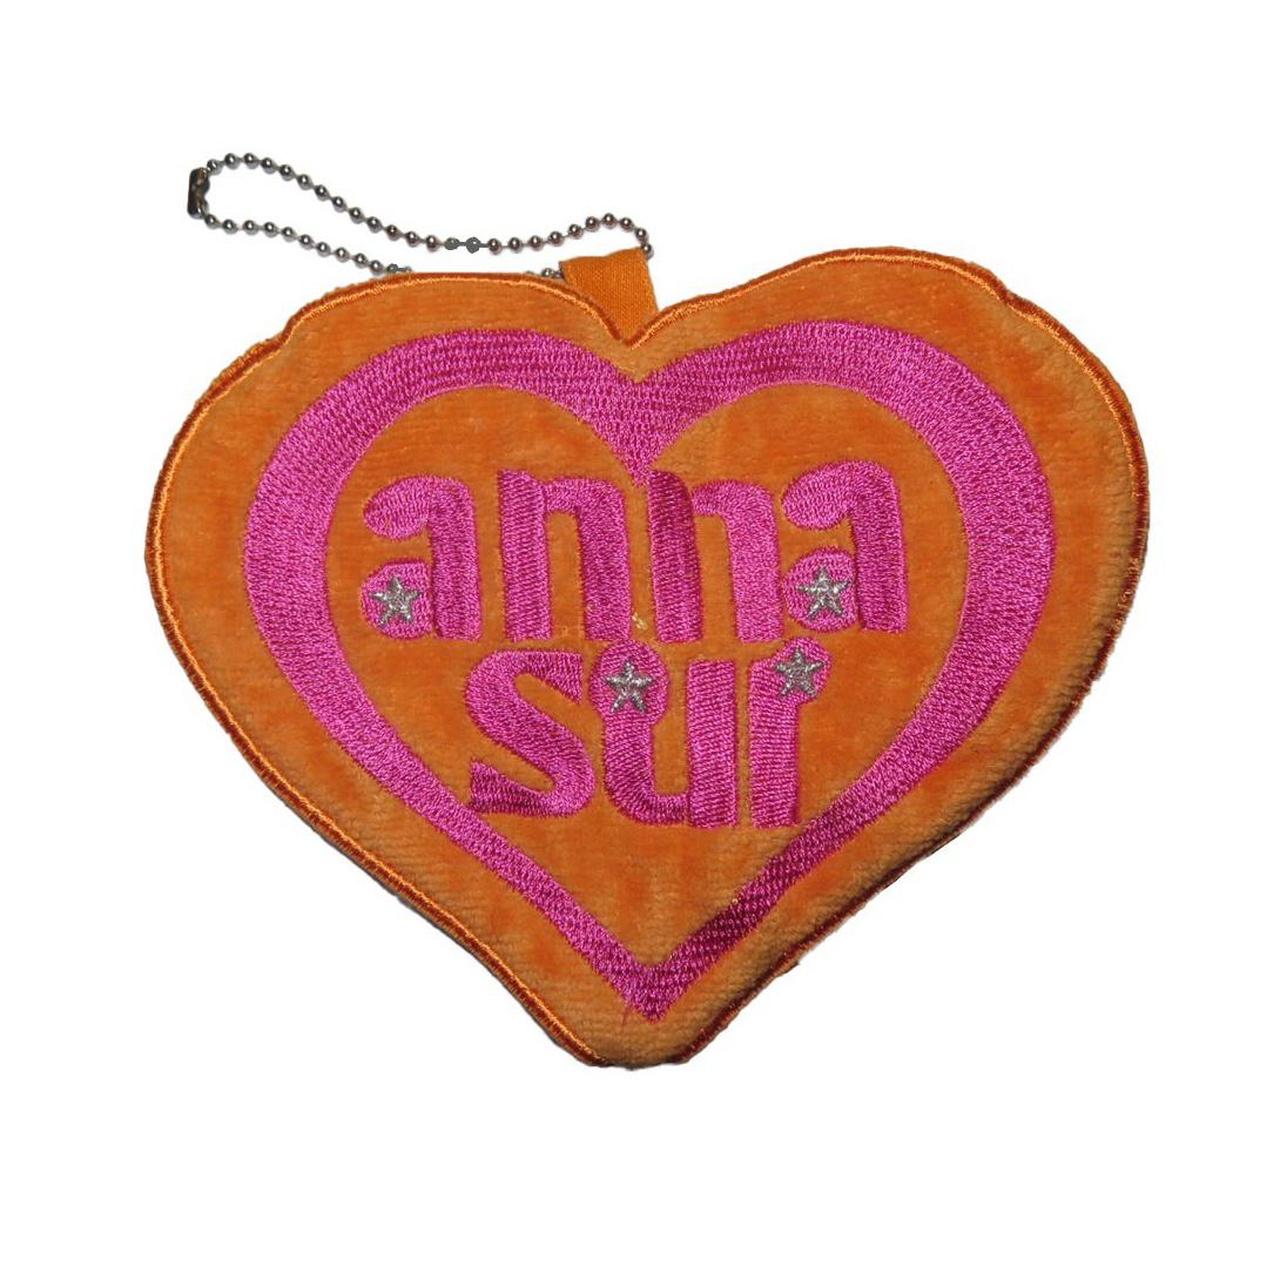 Anna Sui Women's Orange and Pink Wallet-purses